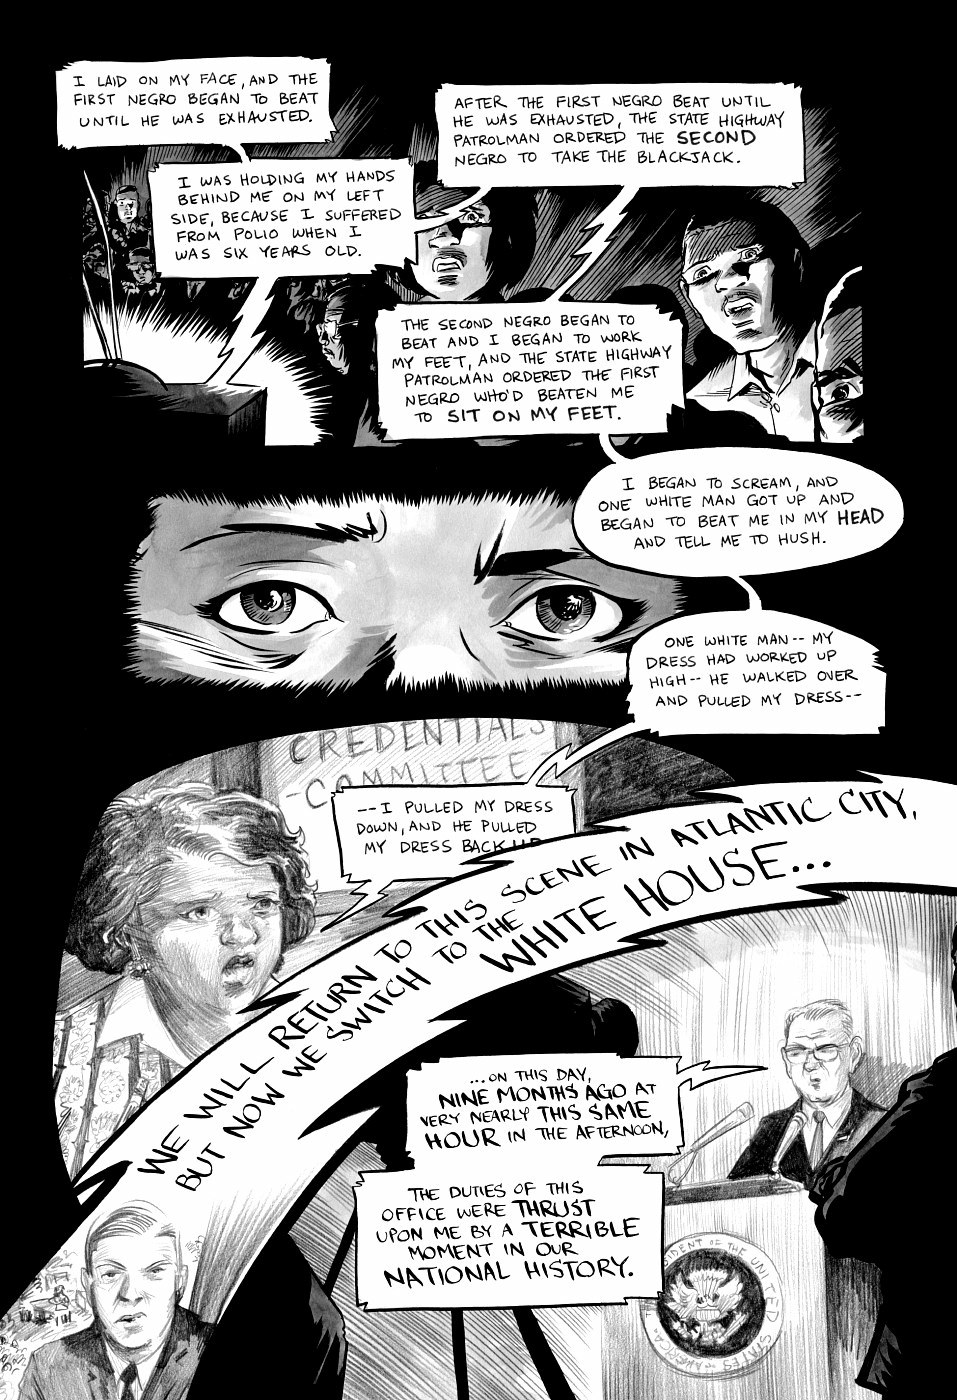 page 112 of march book three graphic novel